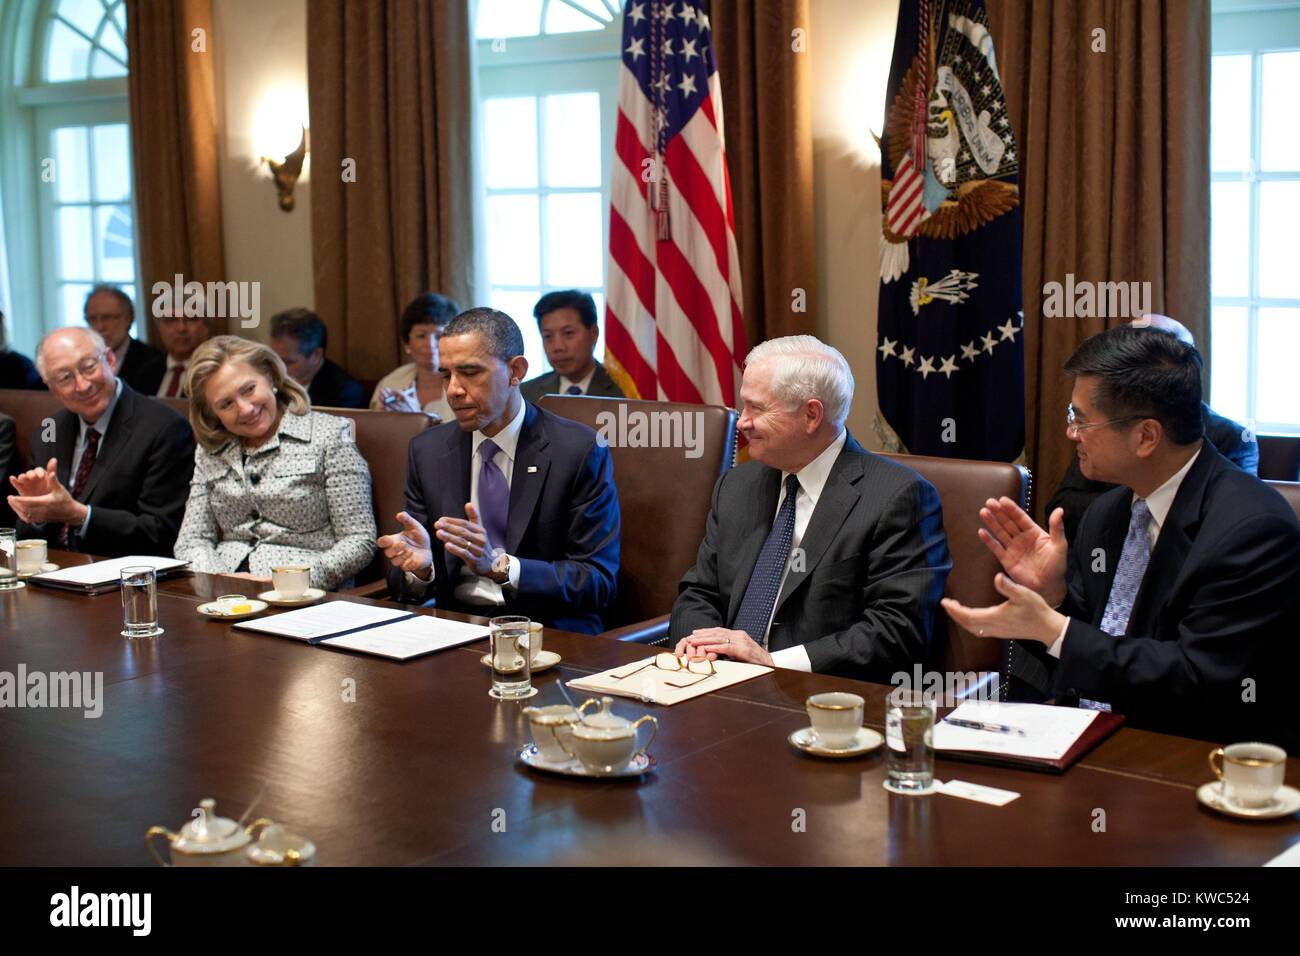 Defense Secretary Robert Gates receives cabinet applause after assassination of Osama Bin Laden. May 3, 2011. In center are Hillary Clinton, Barack Obama, and Gates. (BSLOC 2015 13 243) Stock Photo